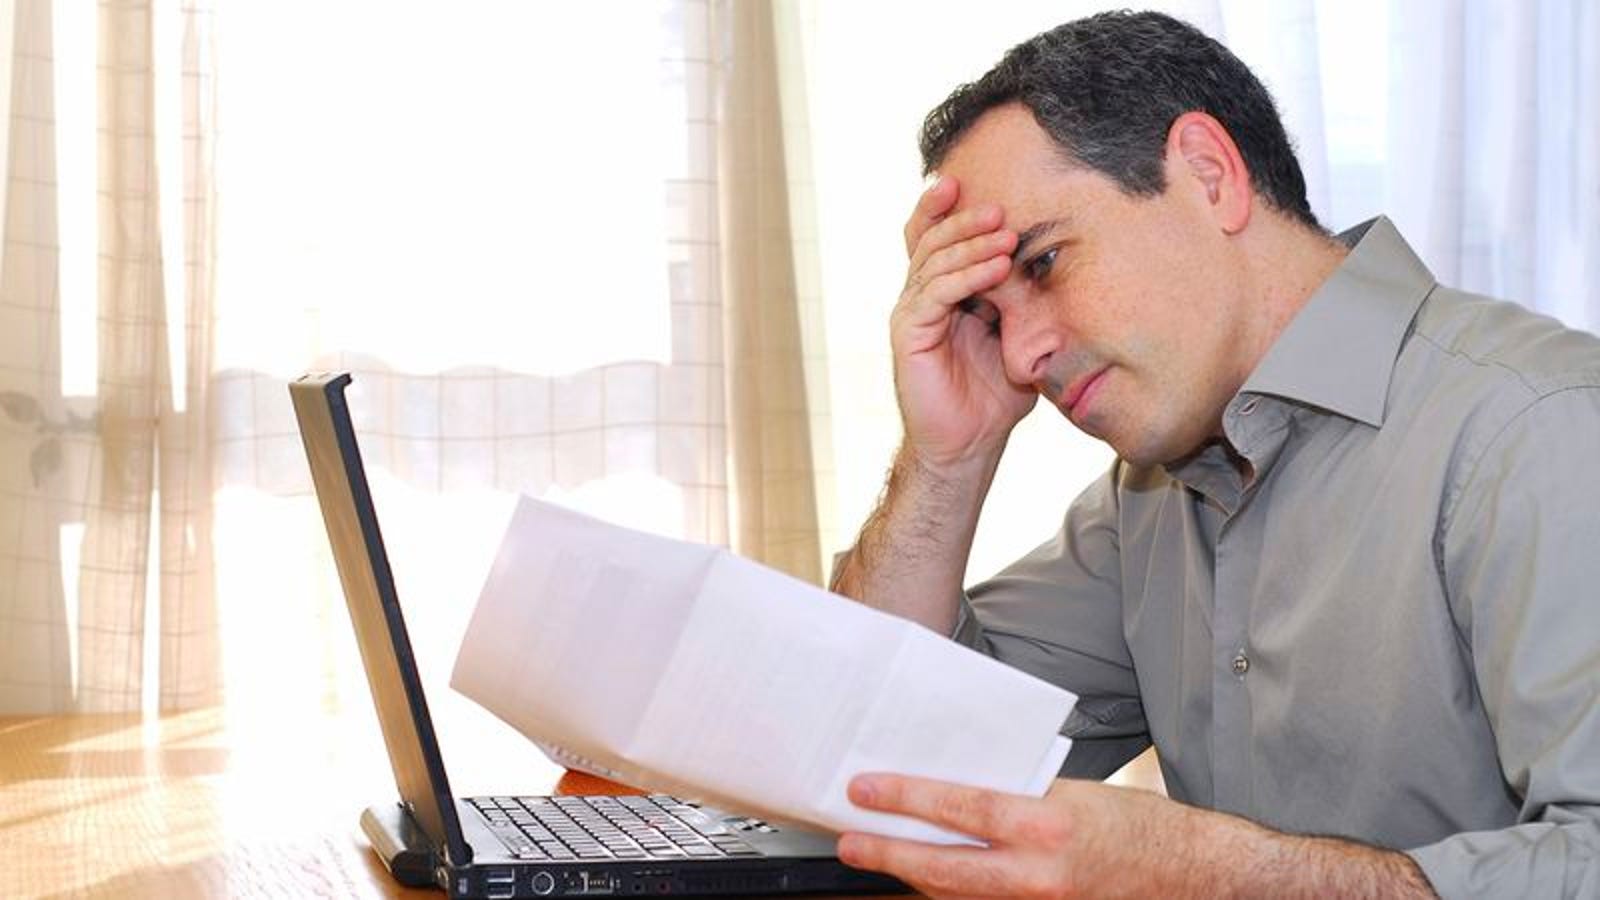 Man Getting Screwed By Company’s $180,000 Health Deductible